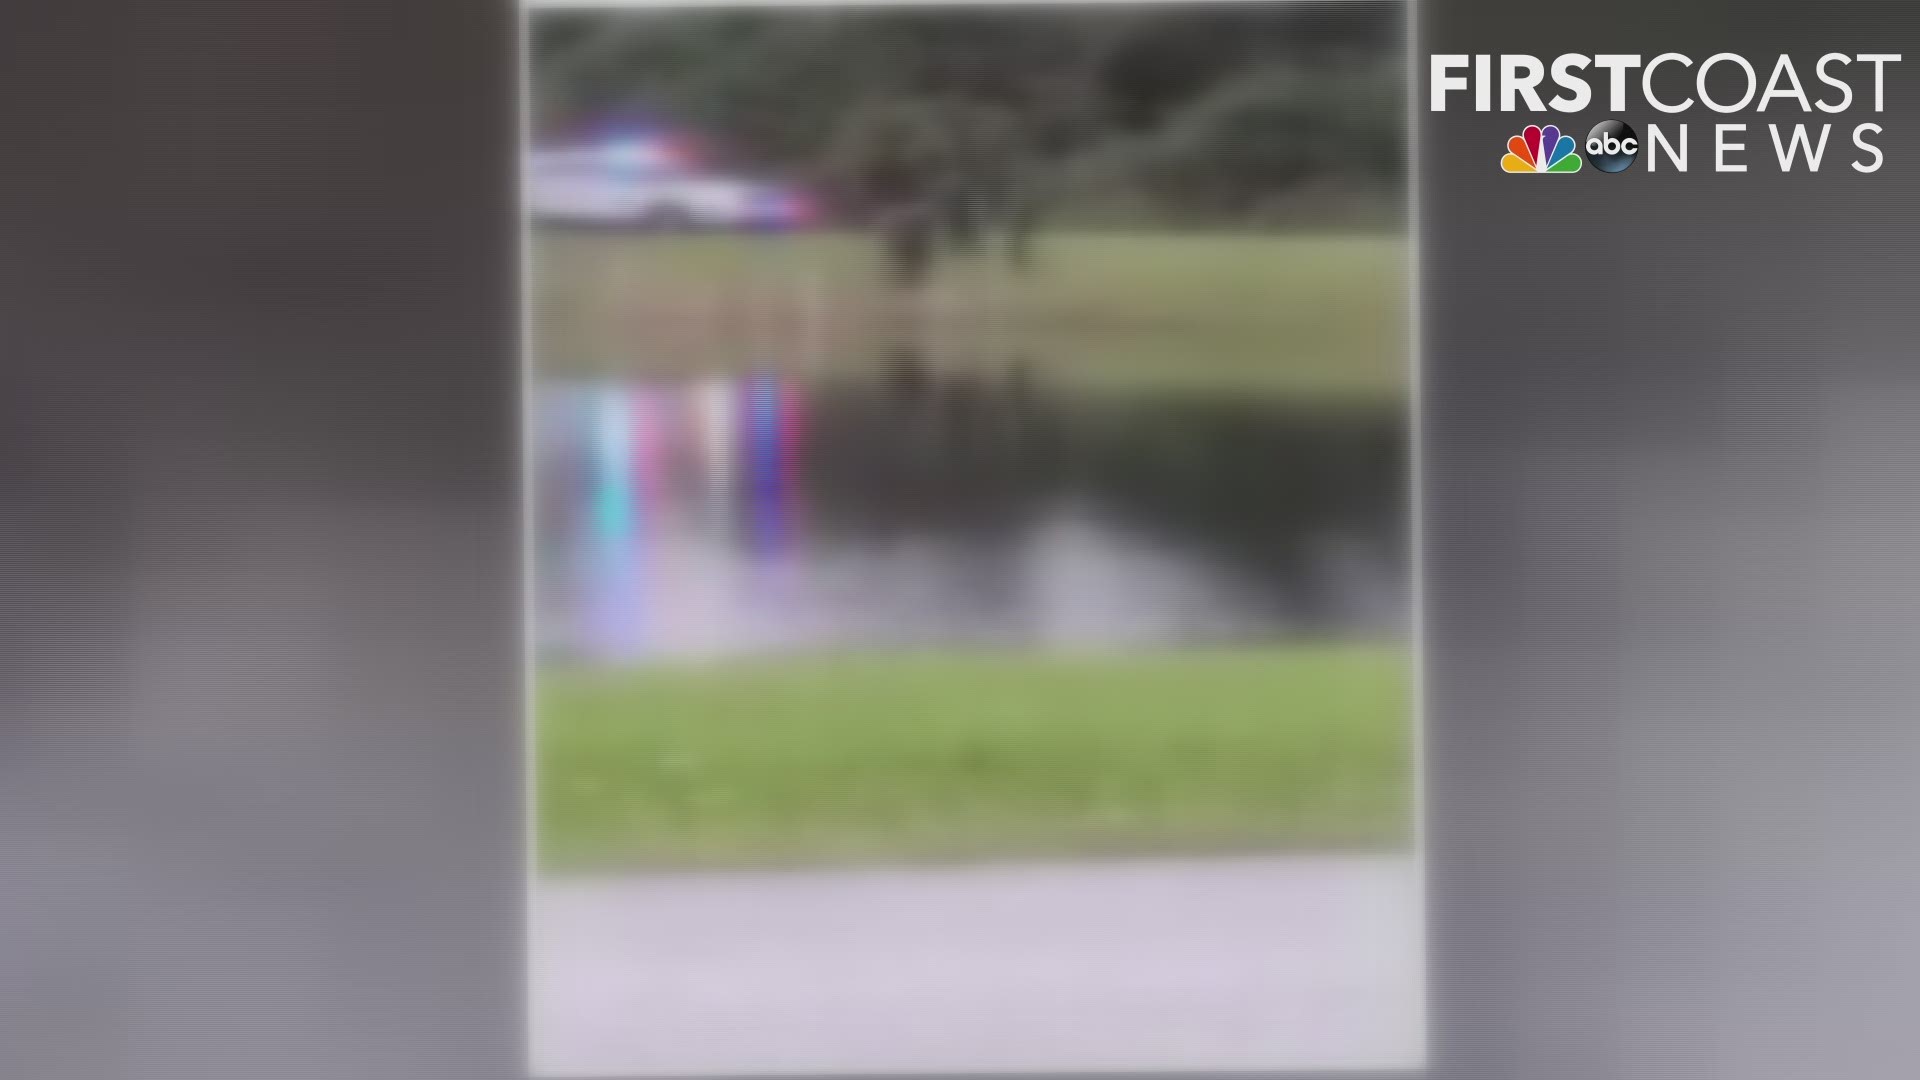 Video shows a person detained following a deadly shooting in St. Augustine.